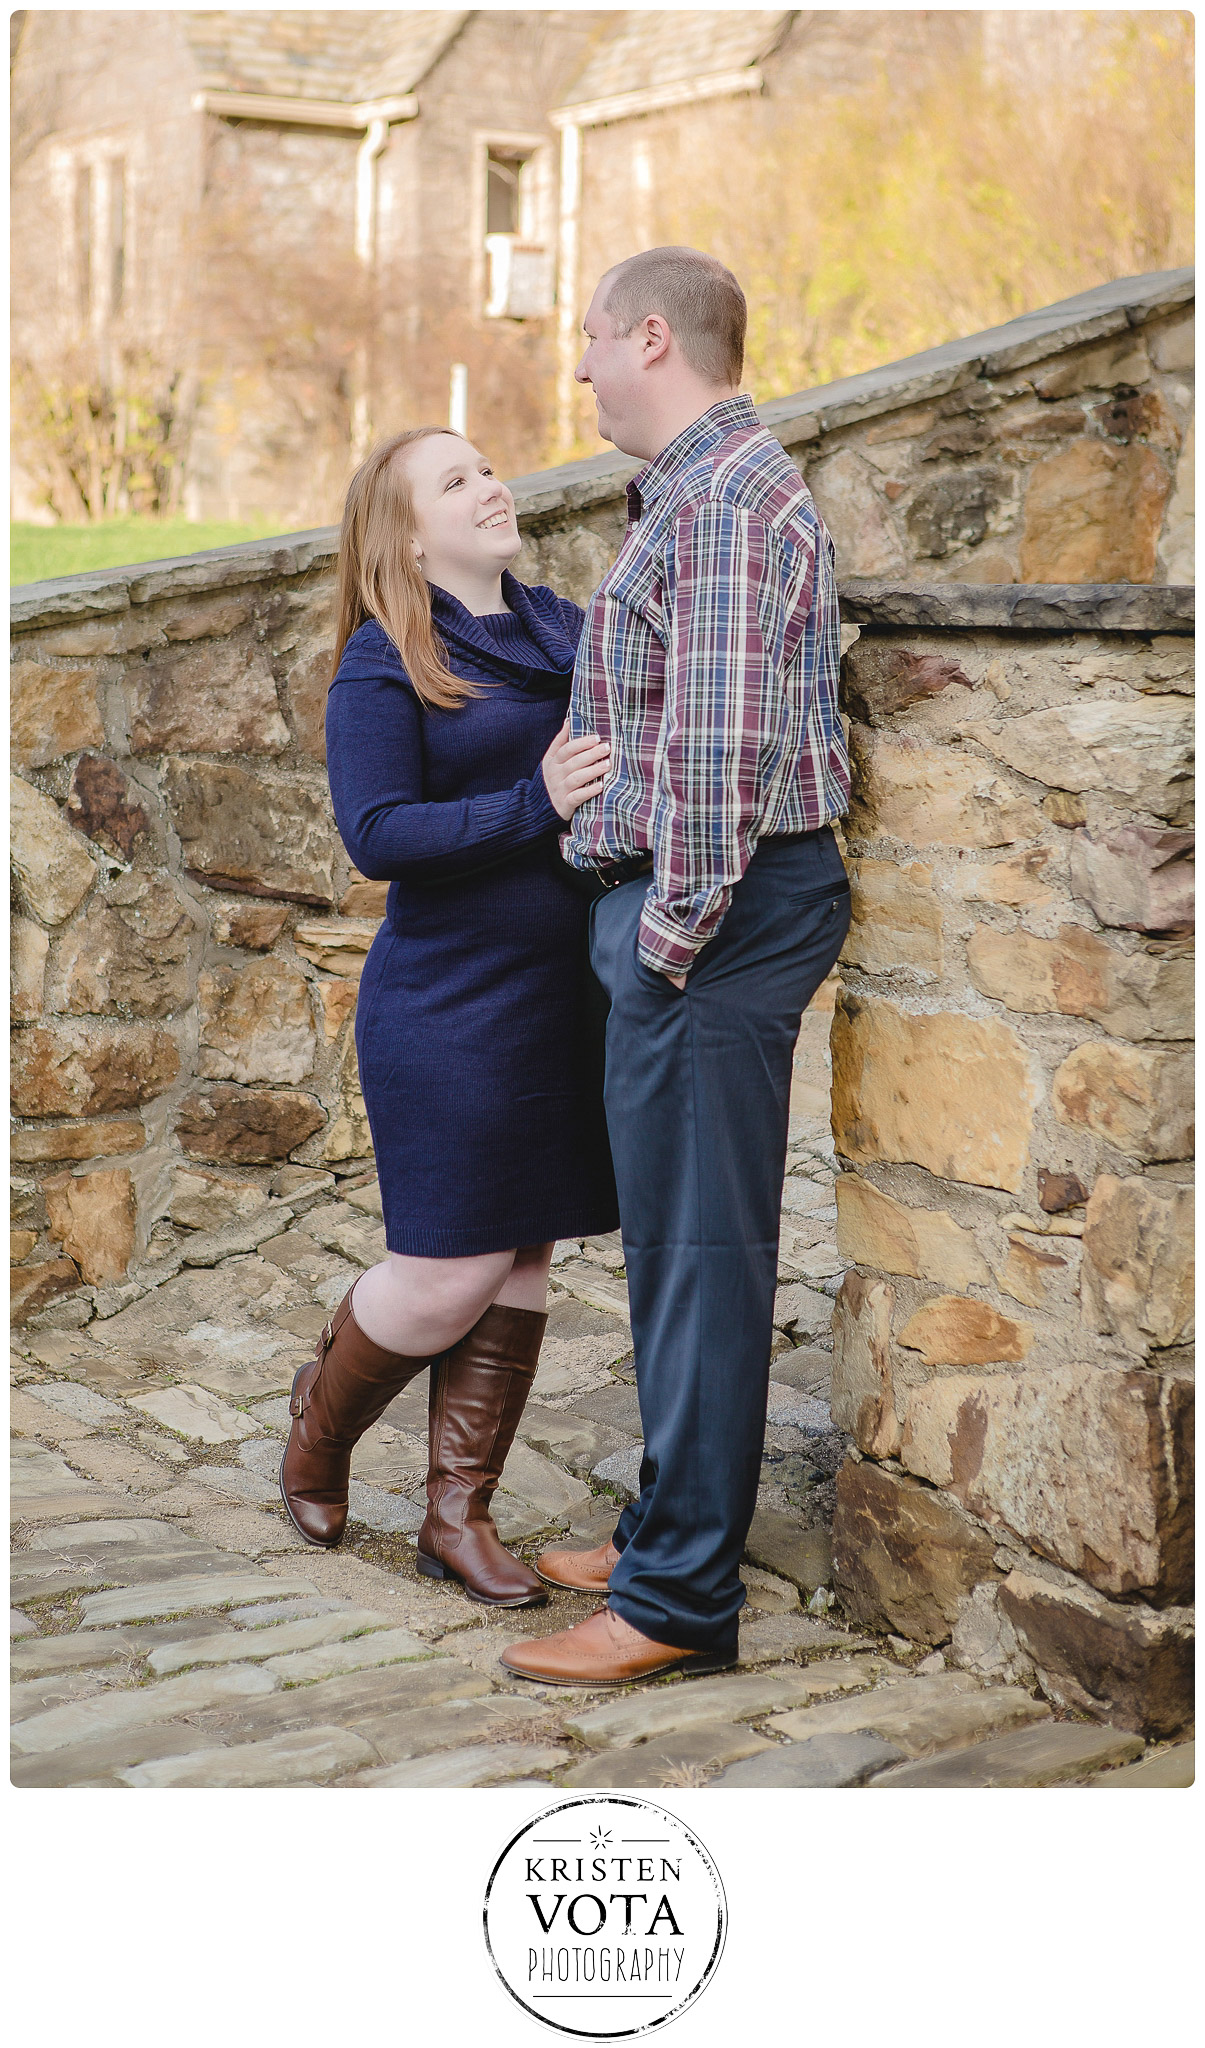 Fall engagement photos at Hartwood Acres stables near Pittsburgh